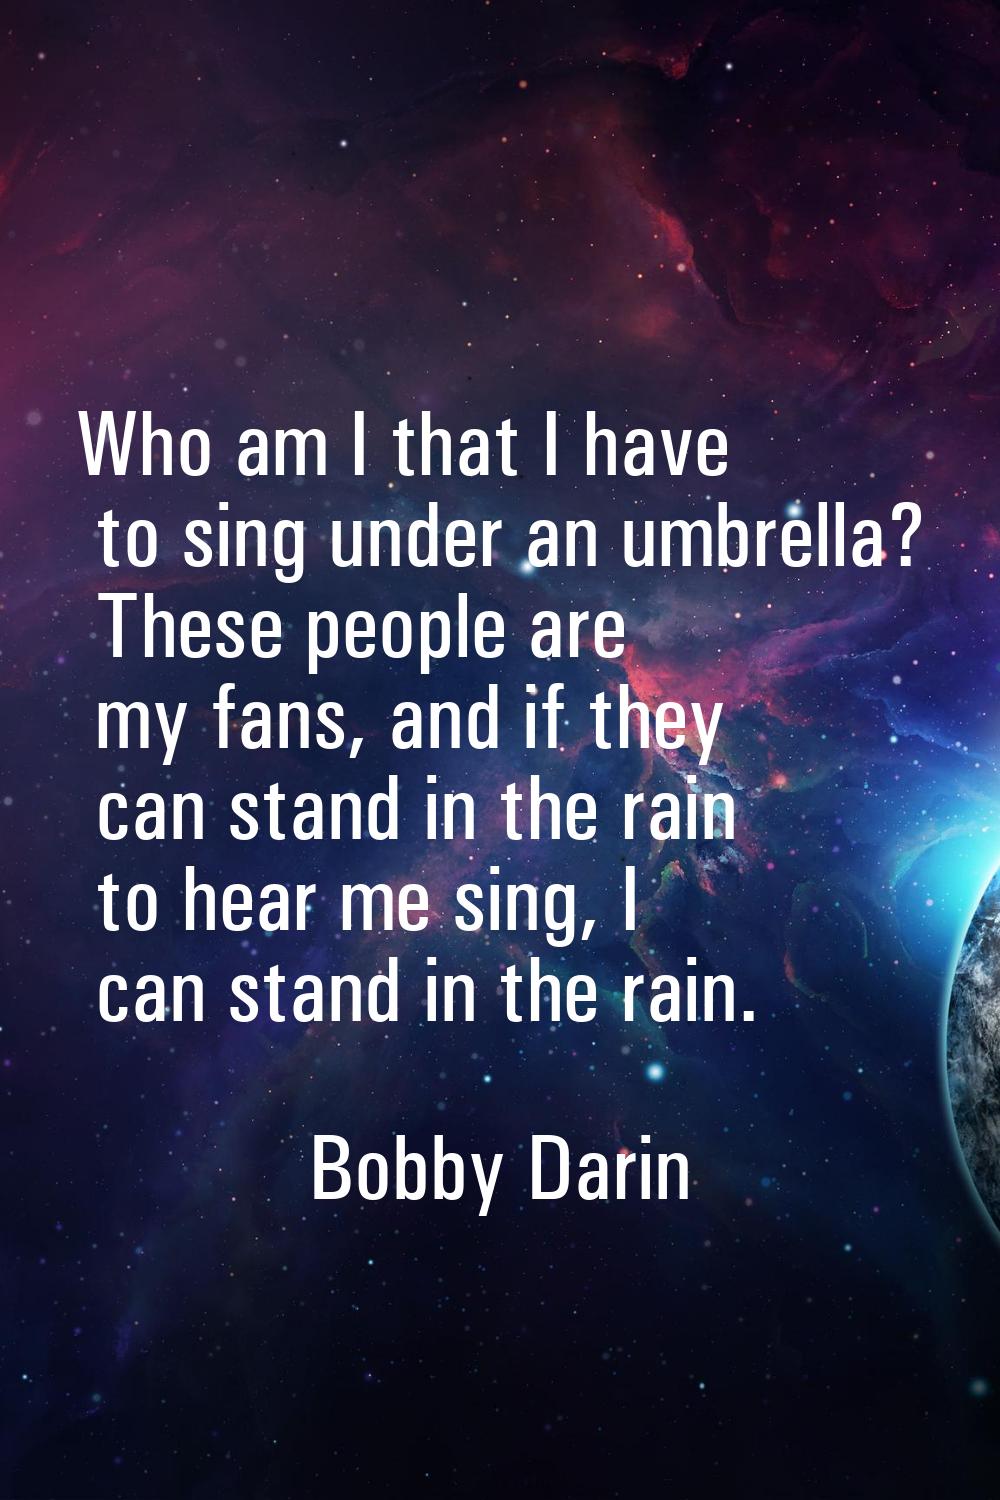 Who am I that I have to sing under an umbrella? These people are my fans, and if they can stand in 